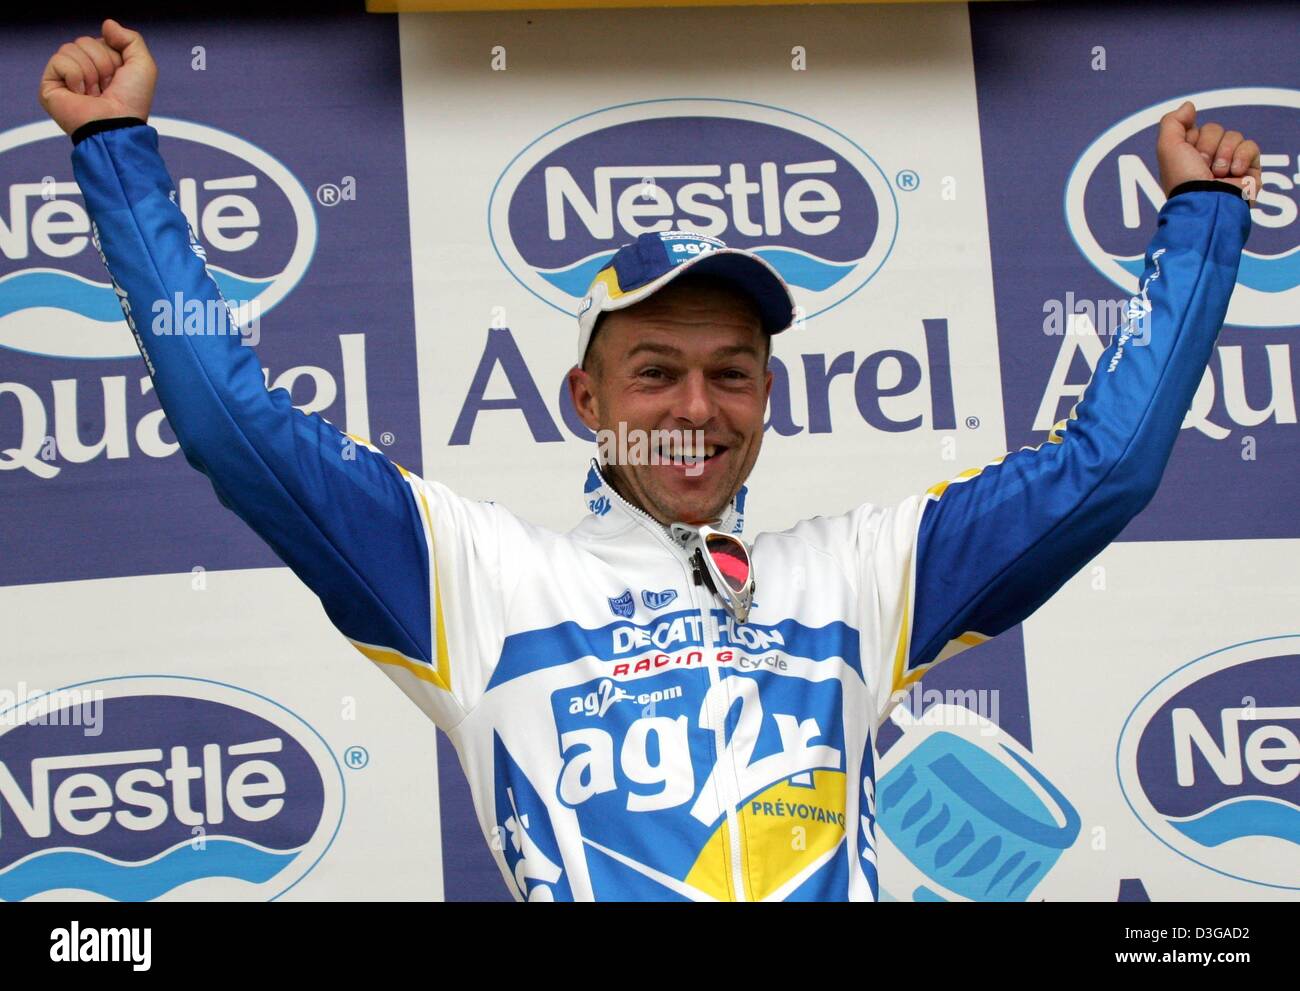 (dpa) - Cyclist Jaan Kirsipuu from Estonia (team AG2R) cheers on the podium after winning the first stage of the Tour de France in Charleroi, Belgium, 4 July 2004. The first and 202.5km long stage of the 91st Tour de France cycling race took the cyclists from Liege to Charleroi. Stock Photo